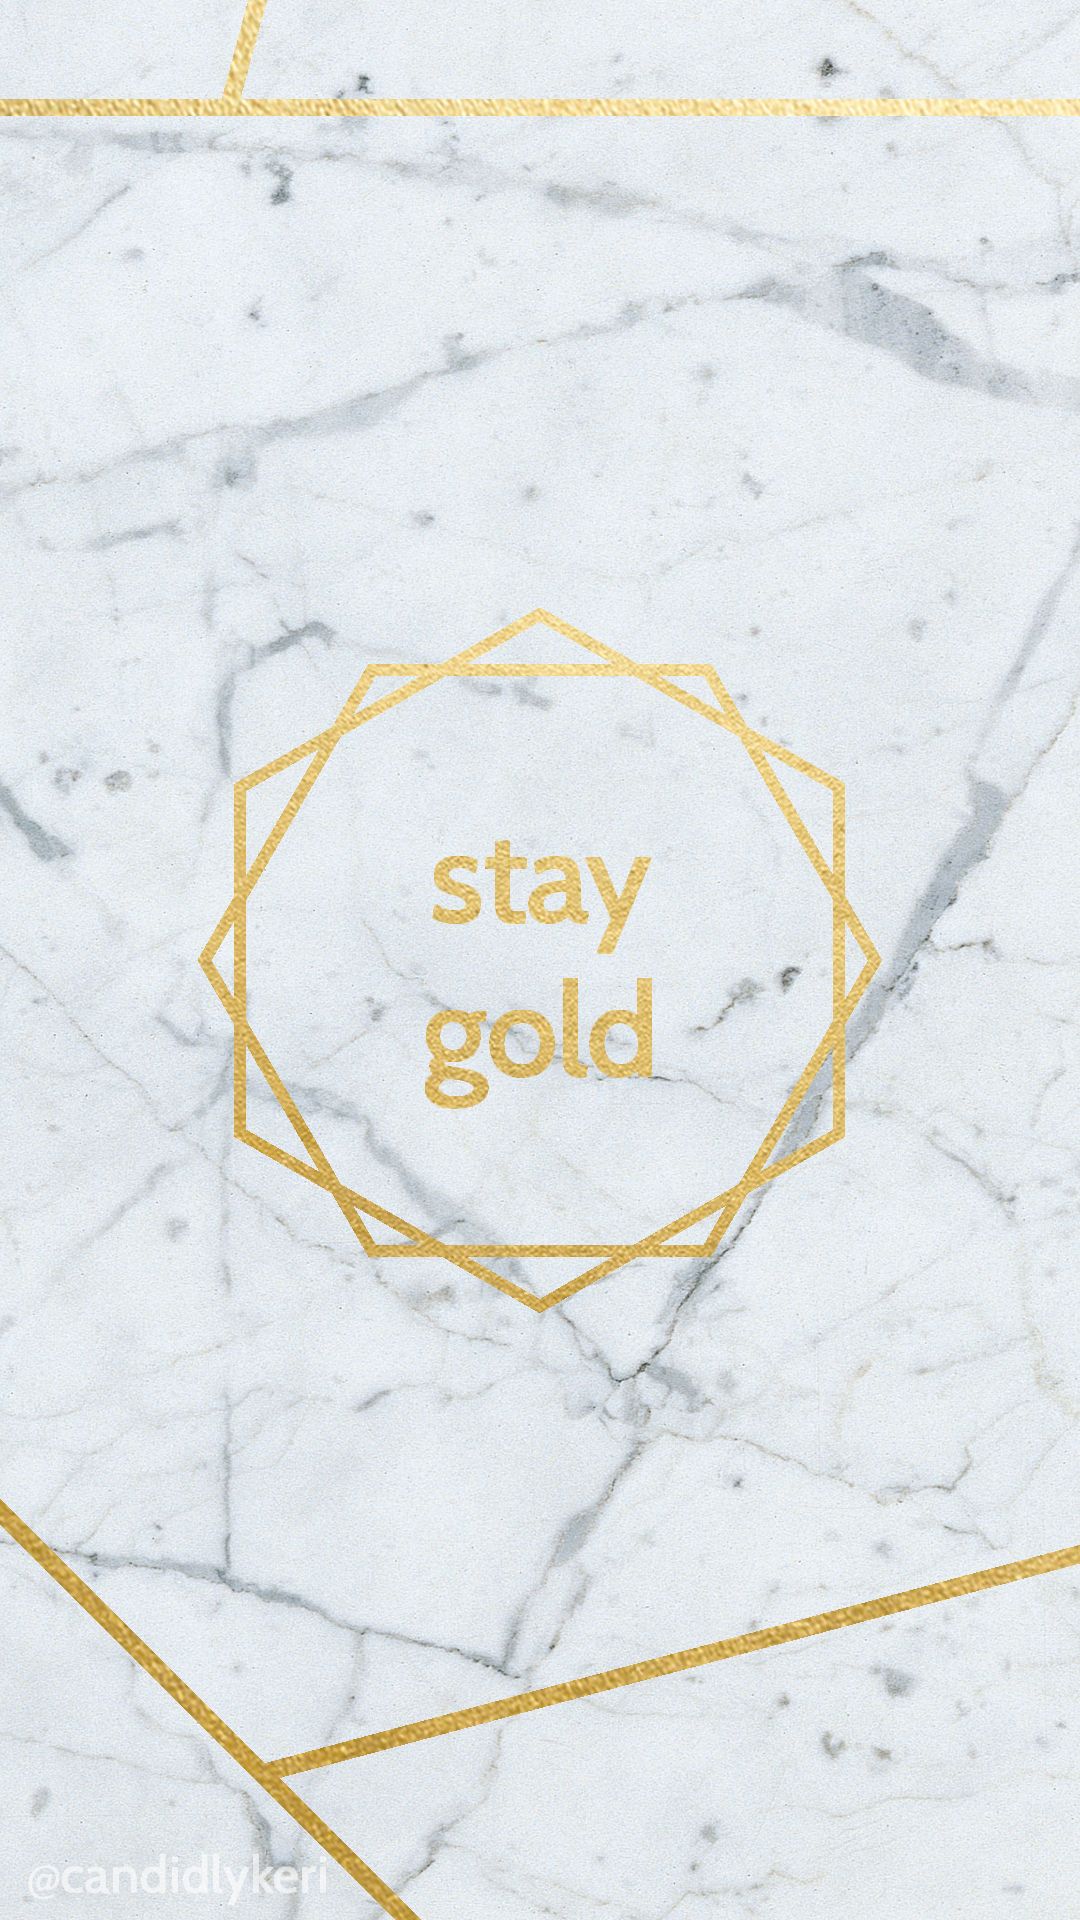 Stay Gold Wallpapers